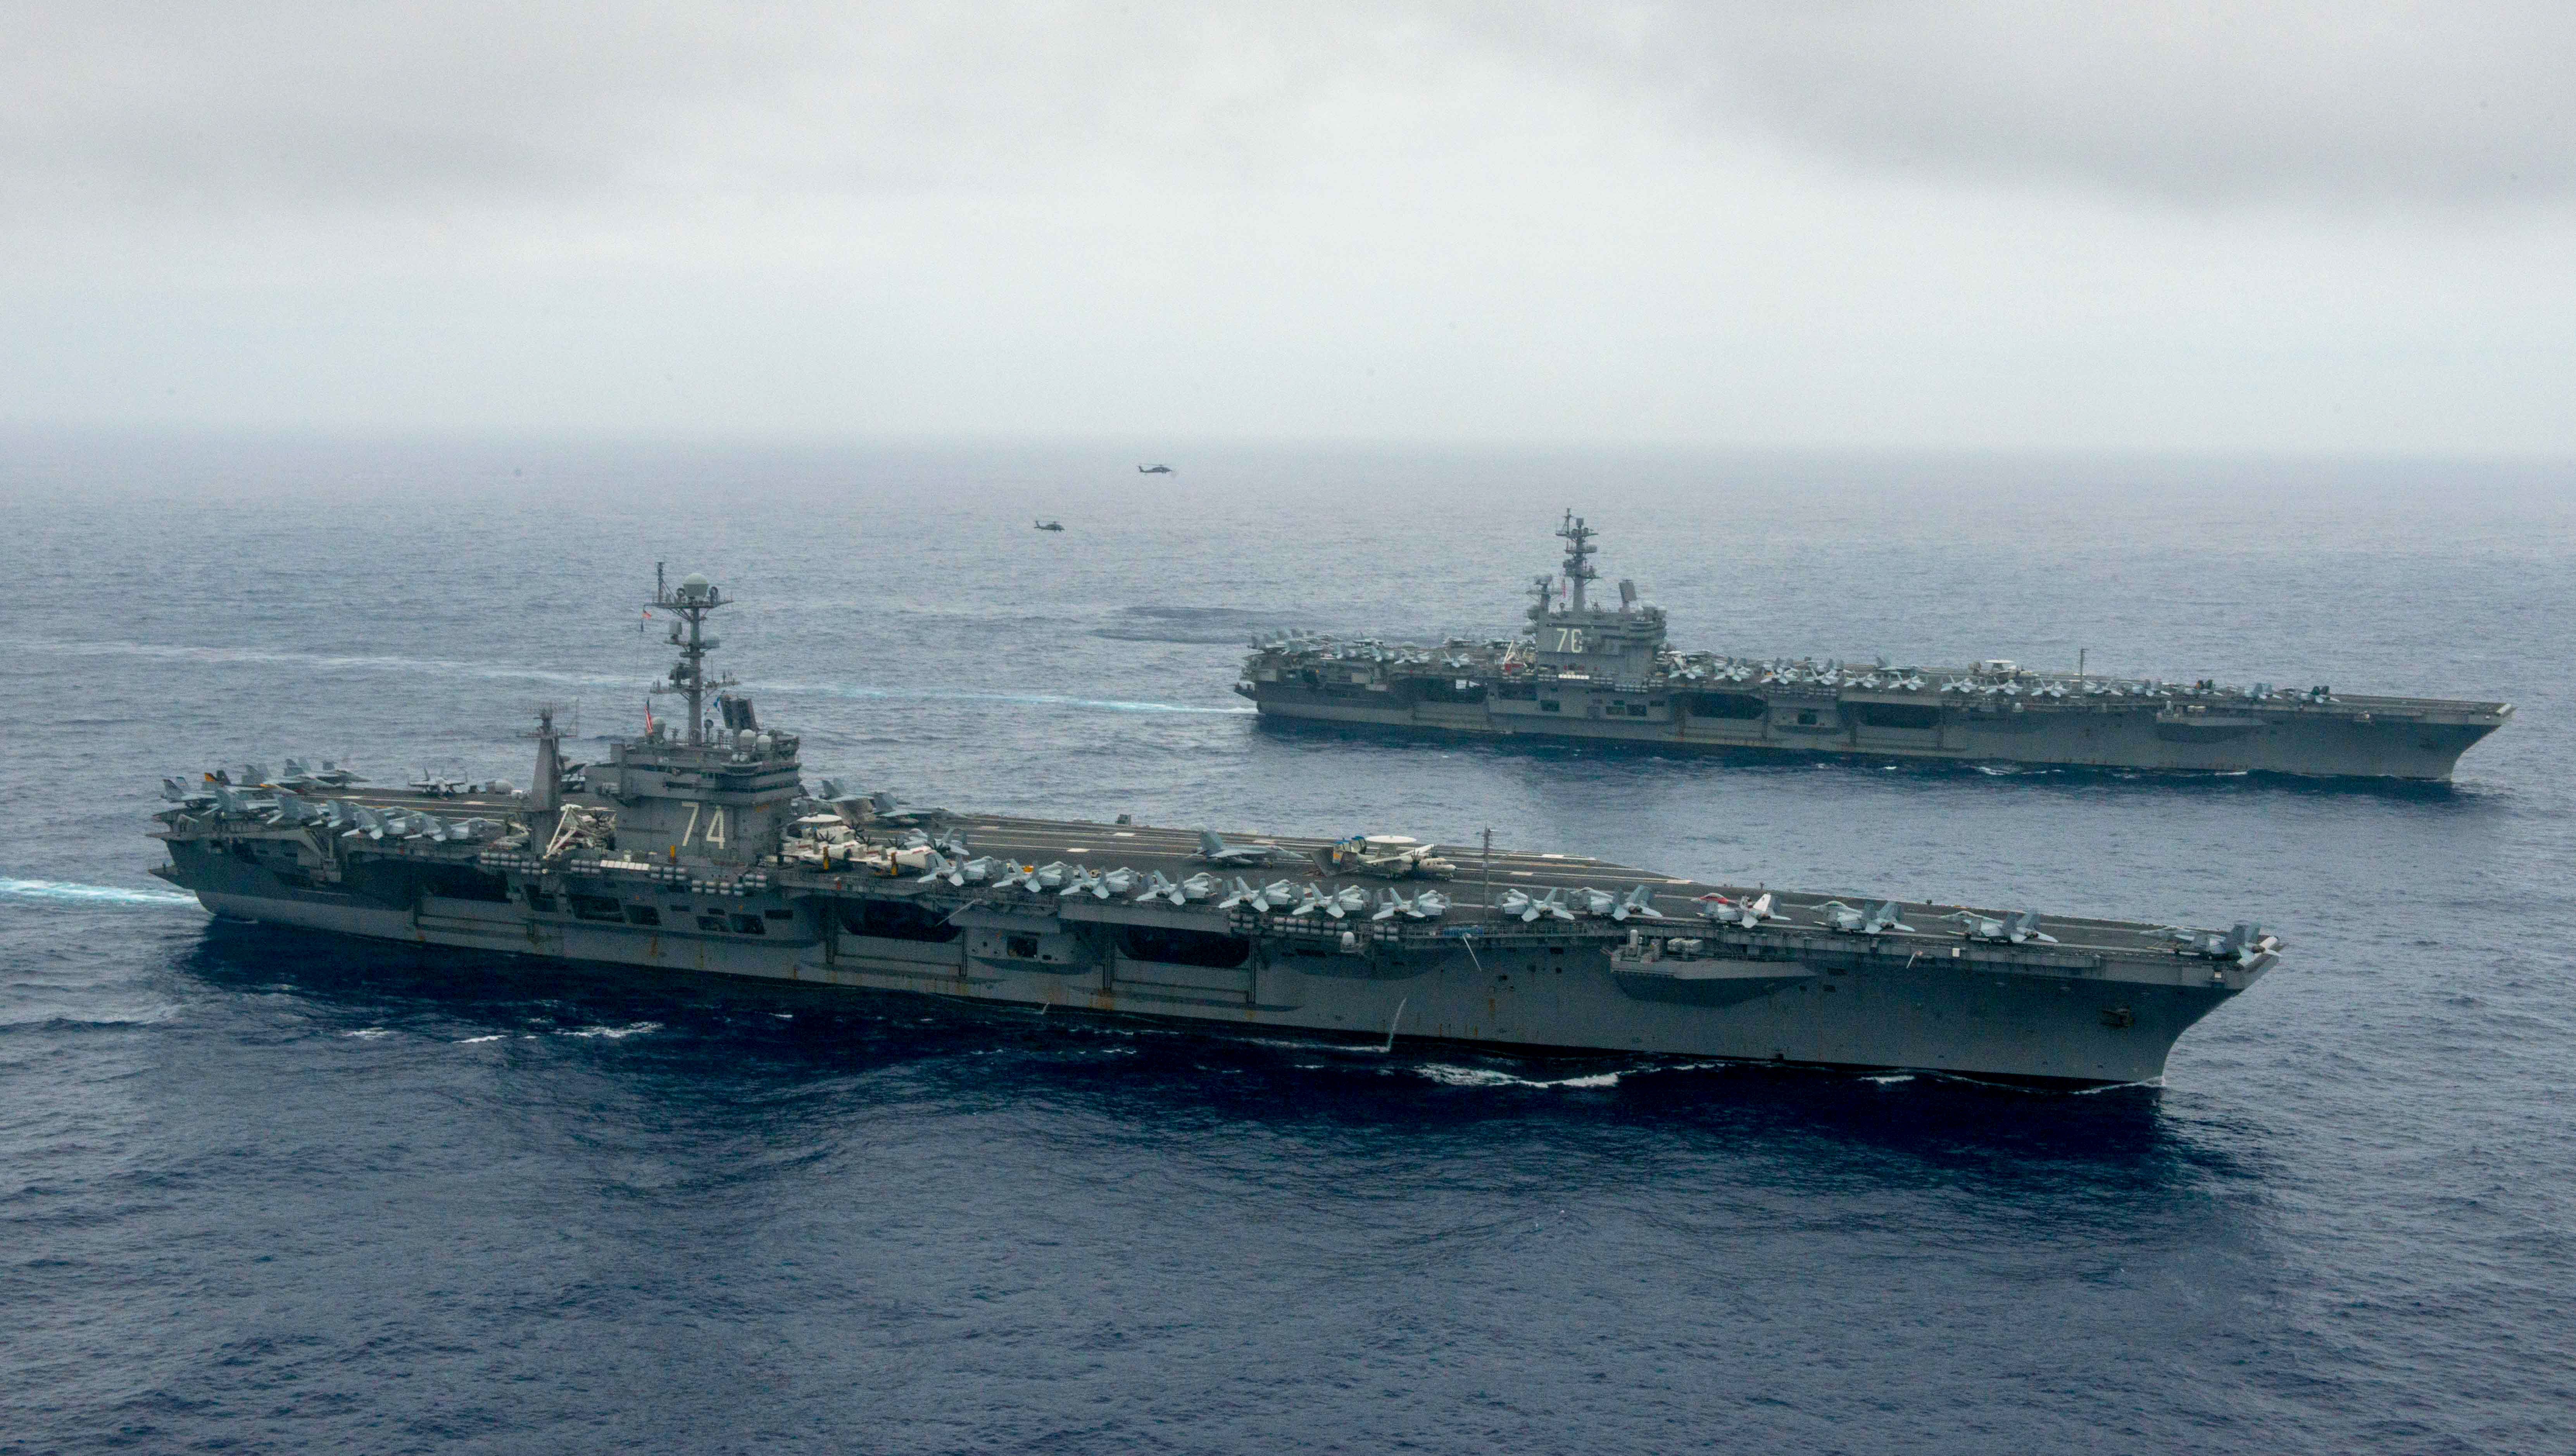 The Nimitz-class aircraft carriers USS John C. Stennis (CVN 74), center, and USS Ronald Reagan (CVN 76) conduct dual aircraft carrier strike group operations in the U.S. 7th Fleet area of operations in support of security and stability in the Indo-Asia-Pacific on June 18, 2016. US Navy photo.